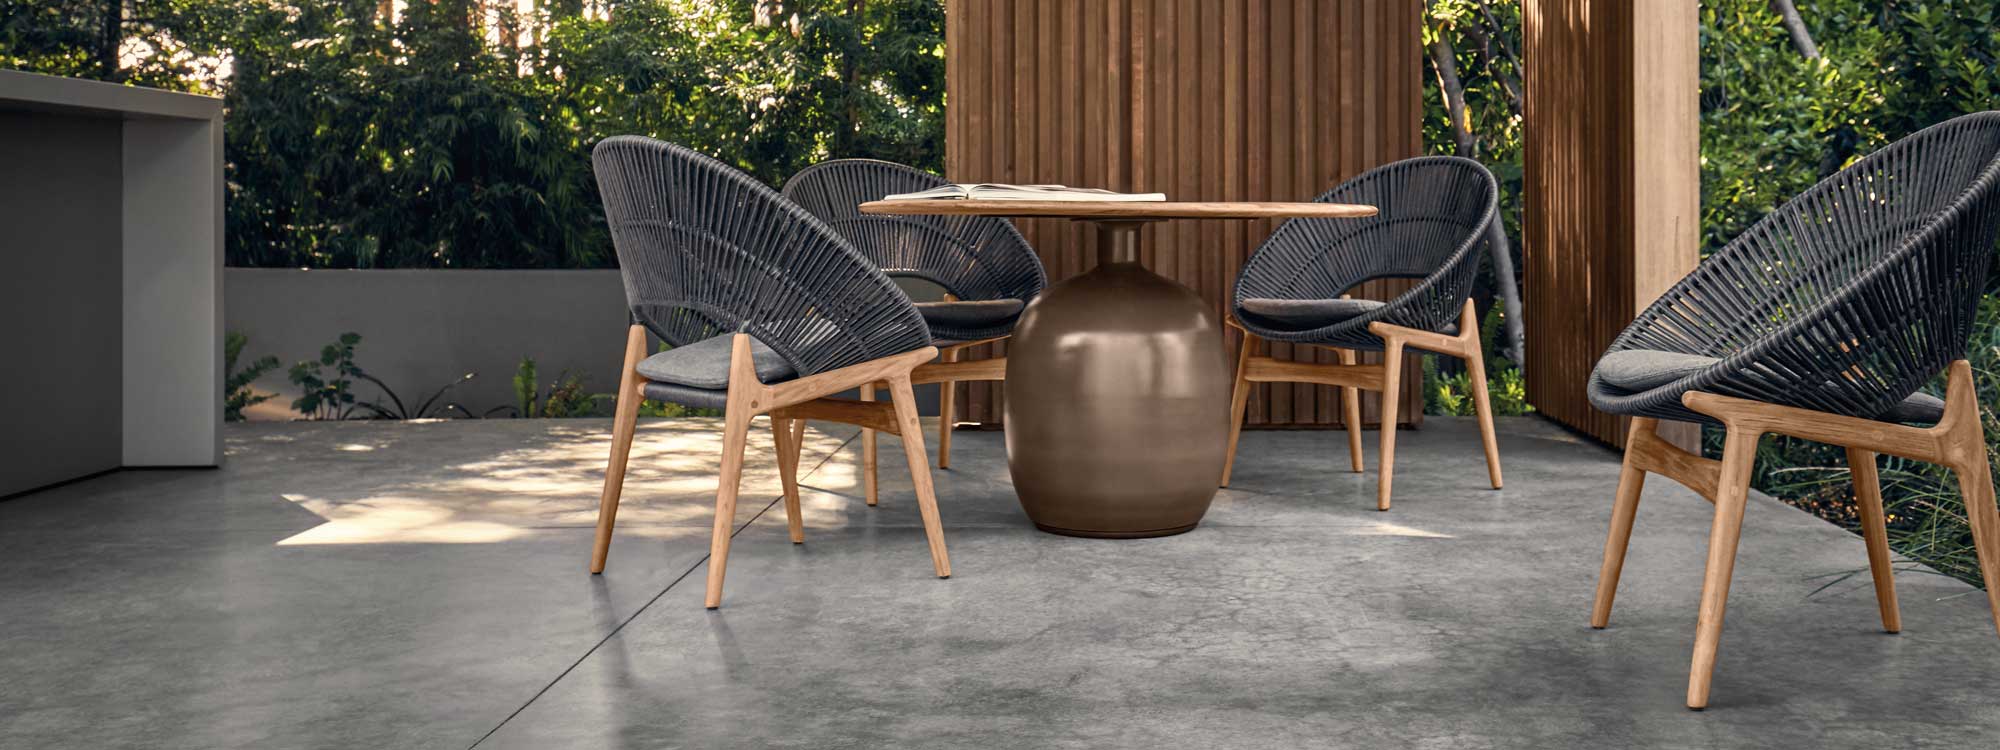 Image of Gloster Bora teak & rope tub chair and Kasha dining table on shady poured concrete terrace